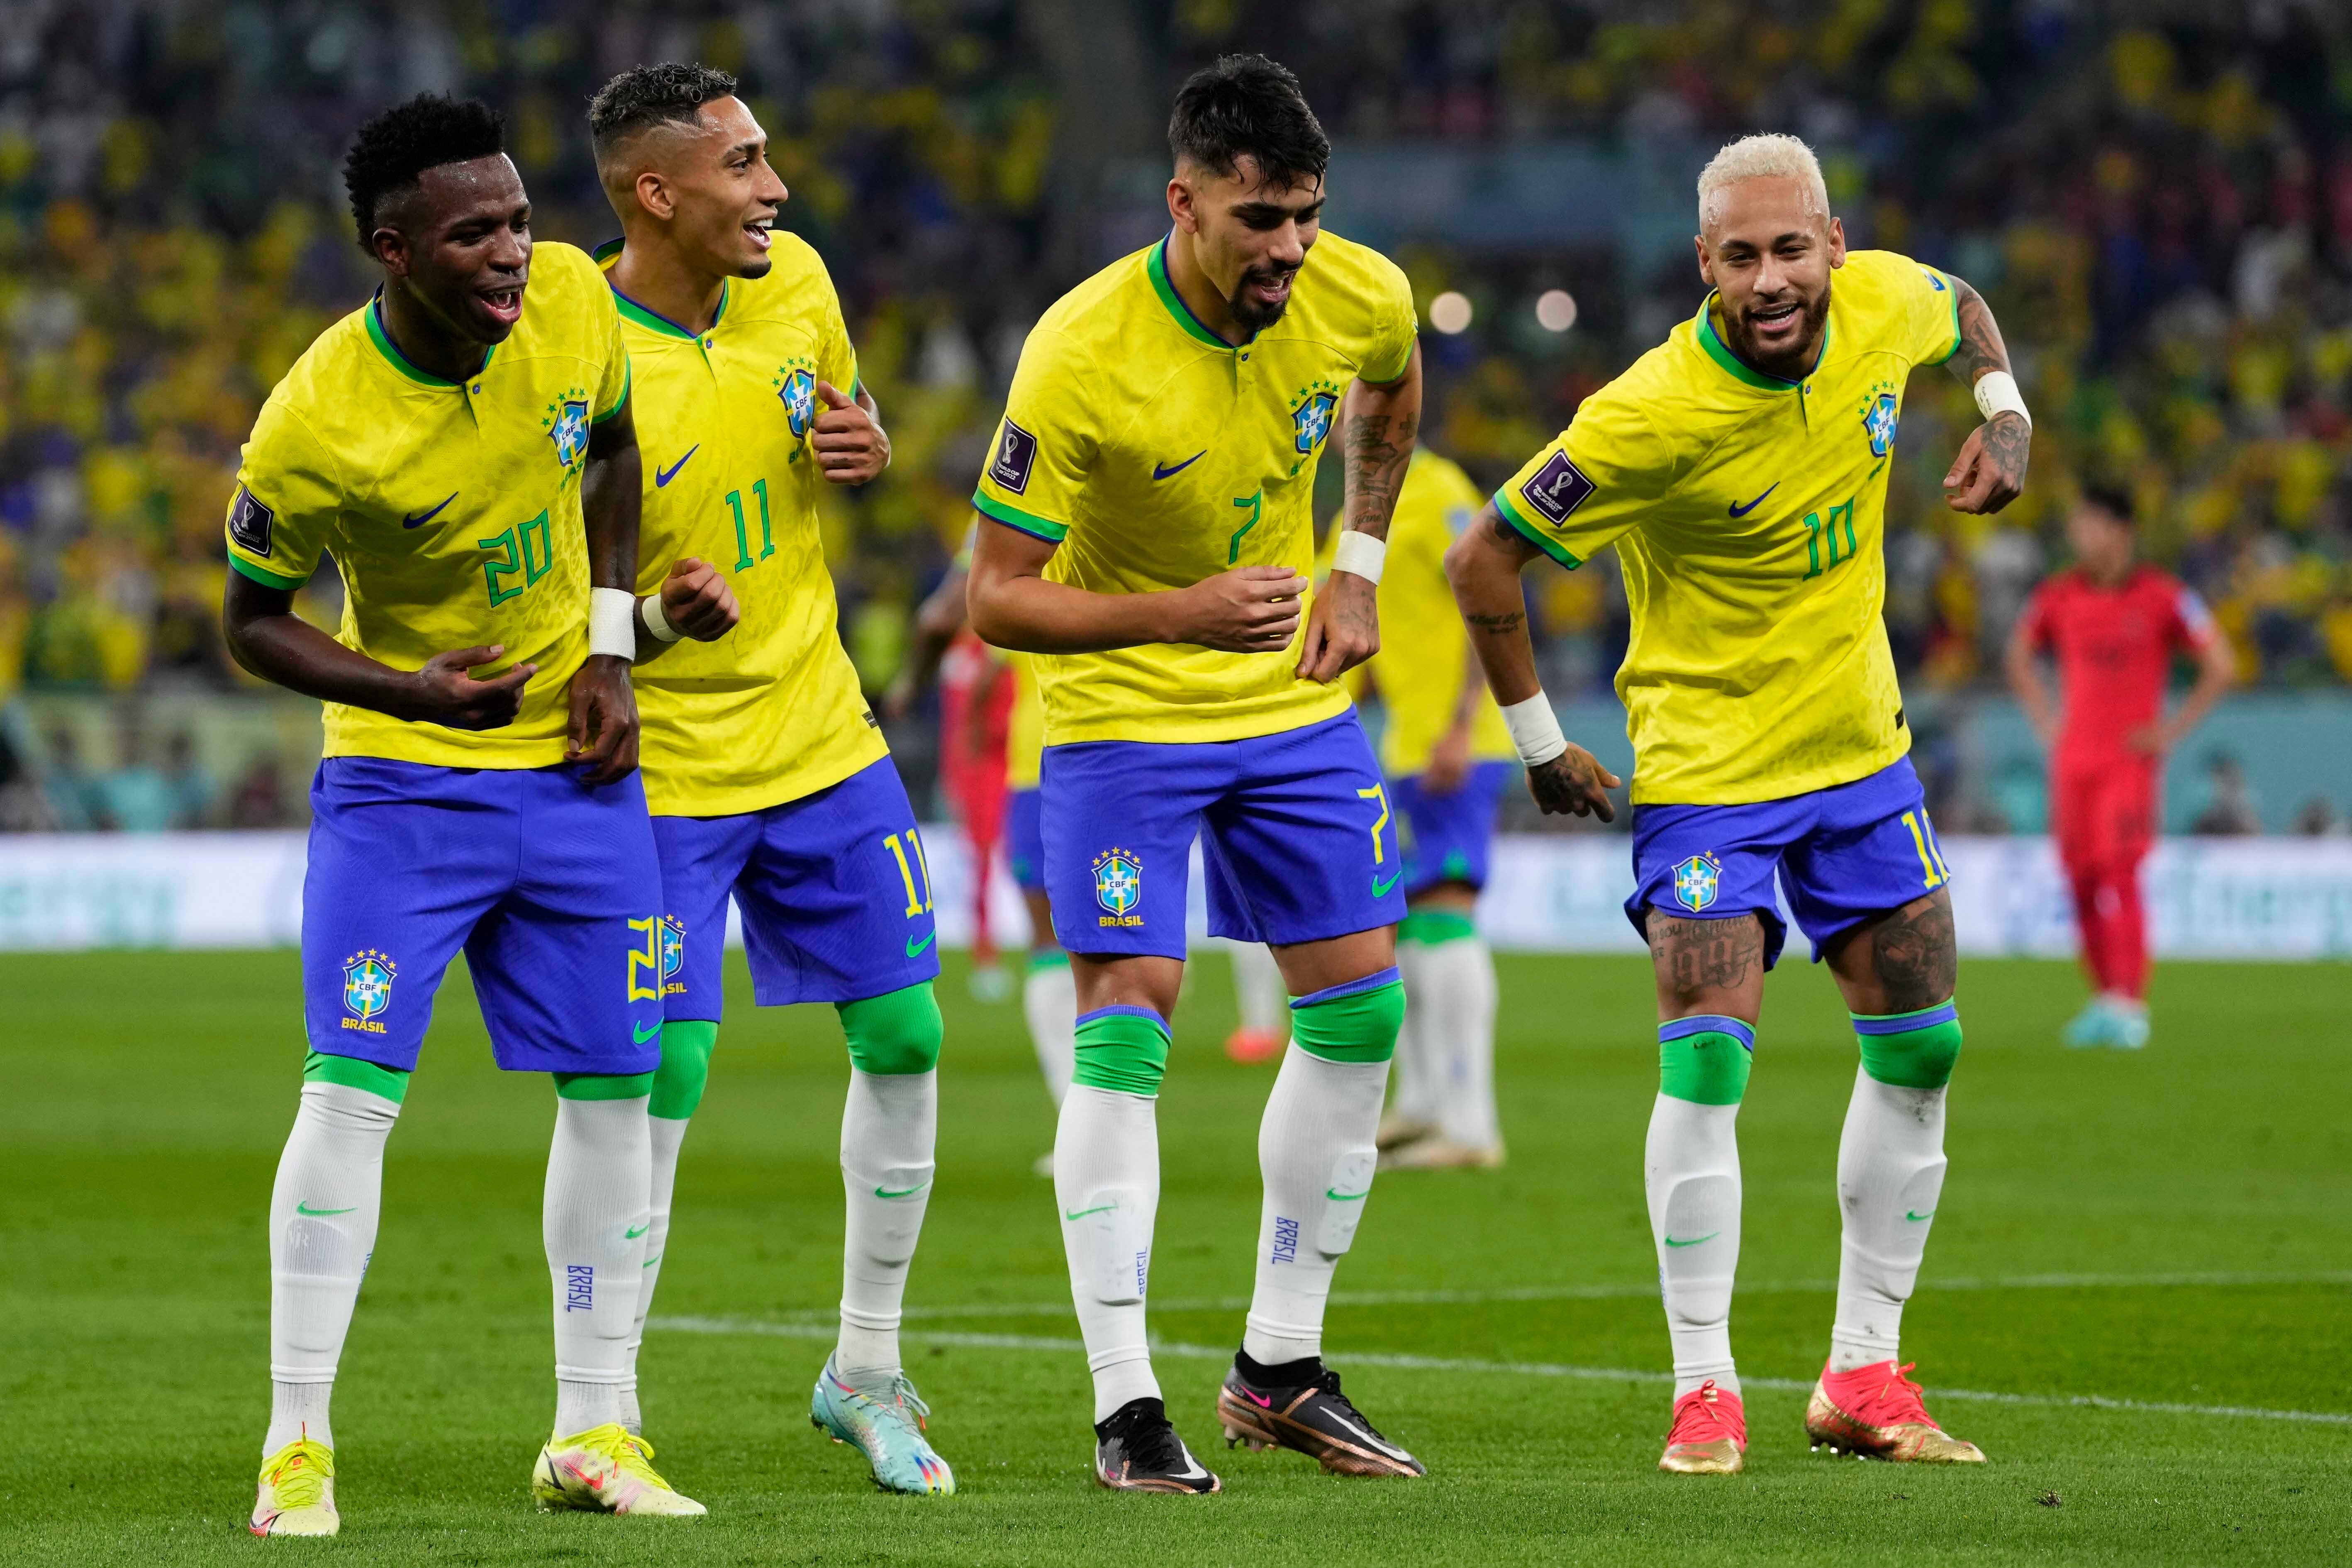 Brazil’s players dance as they celebrate scoring against South Korea